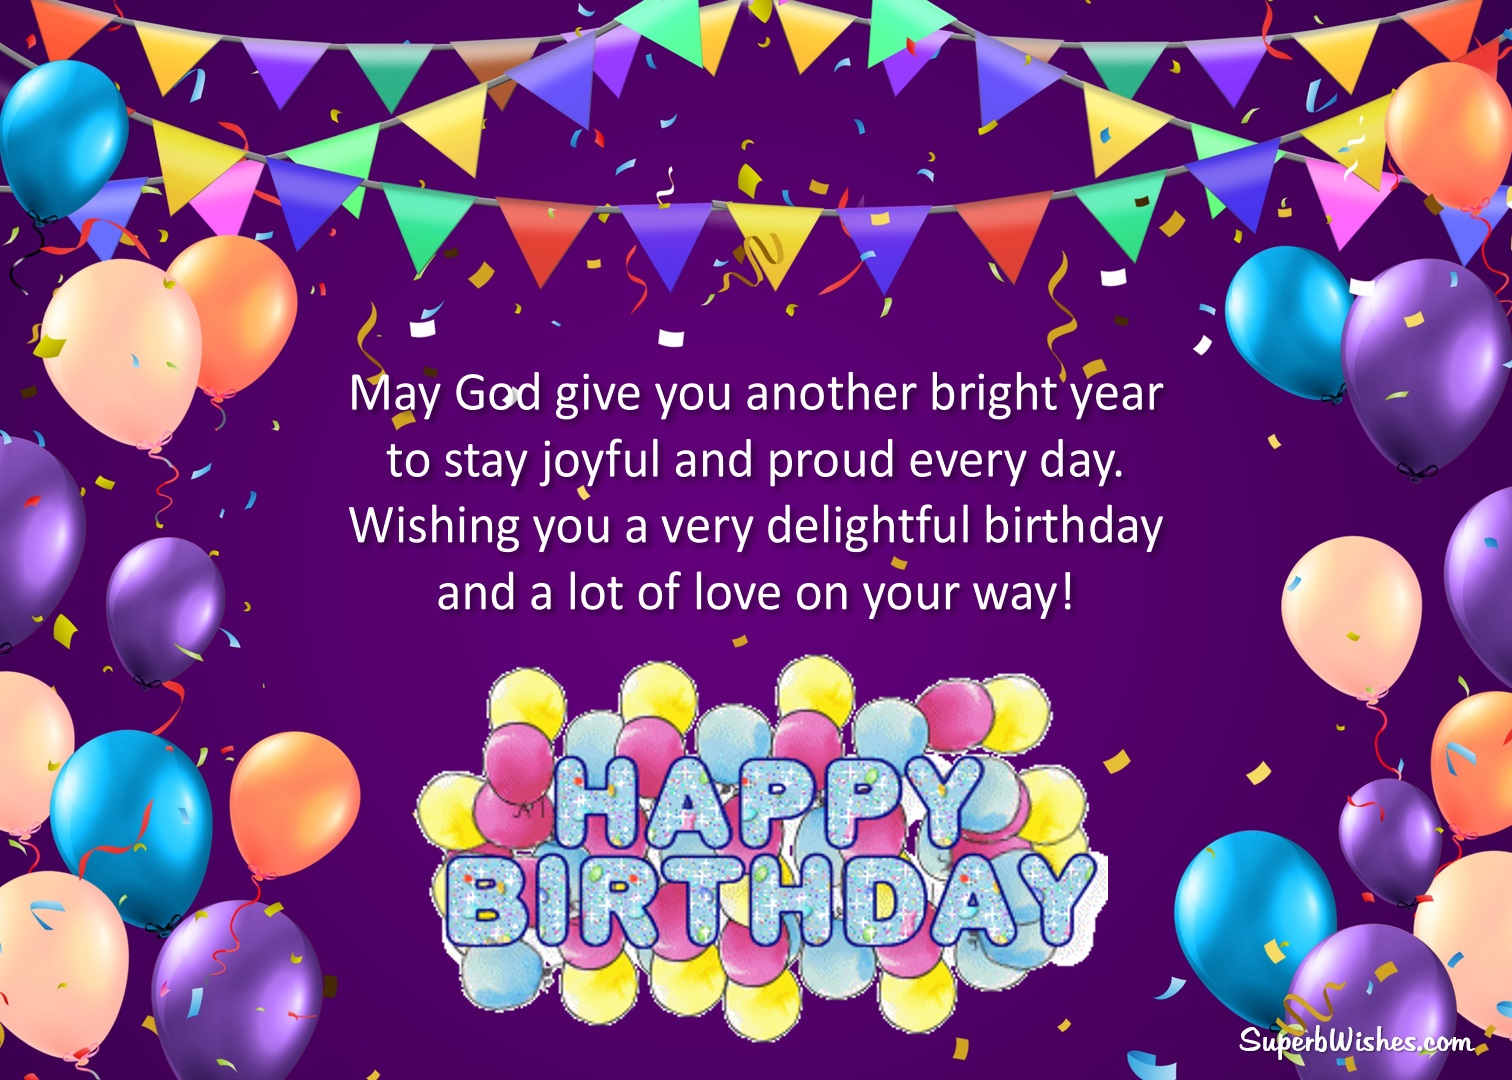 Free Happy Birthday Wishes For Son Pictures. Superbwishes.com